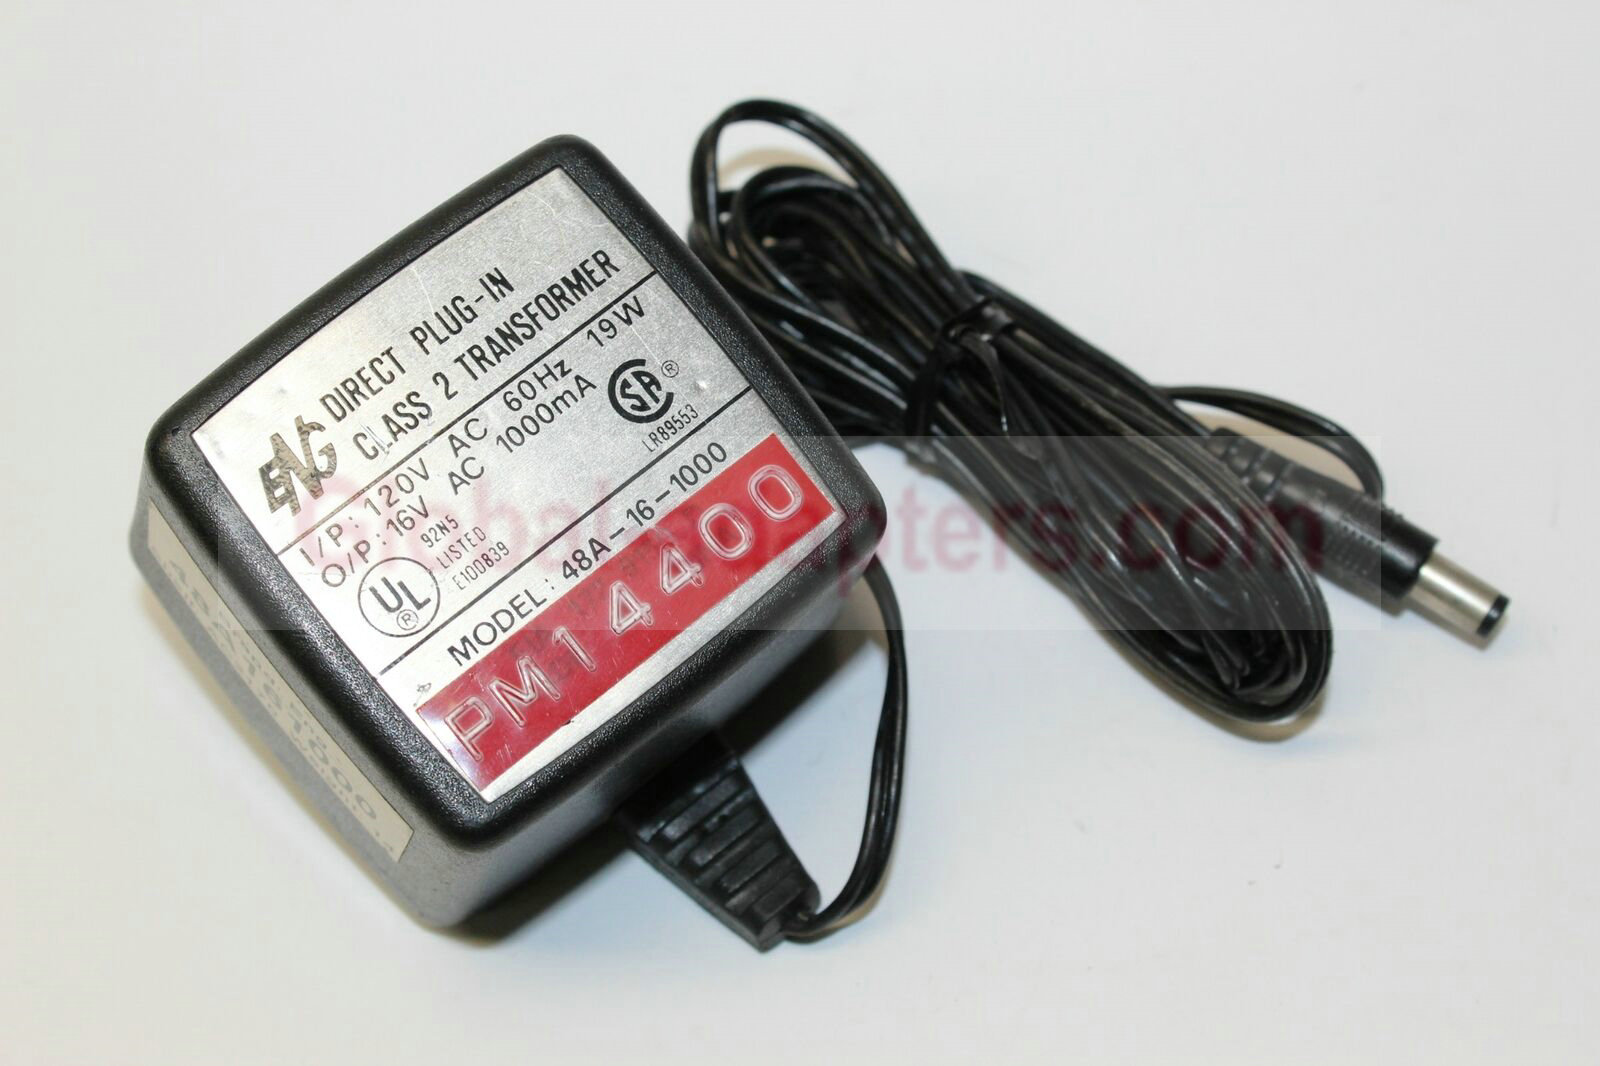 New 16V 1A ENG 48A-16-1000 Class 2 Transformer Power Supply Ac Adapter - Click Image to Close